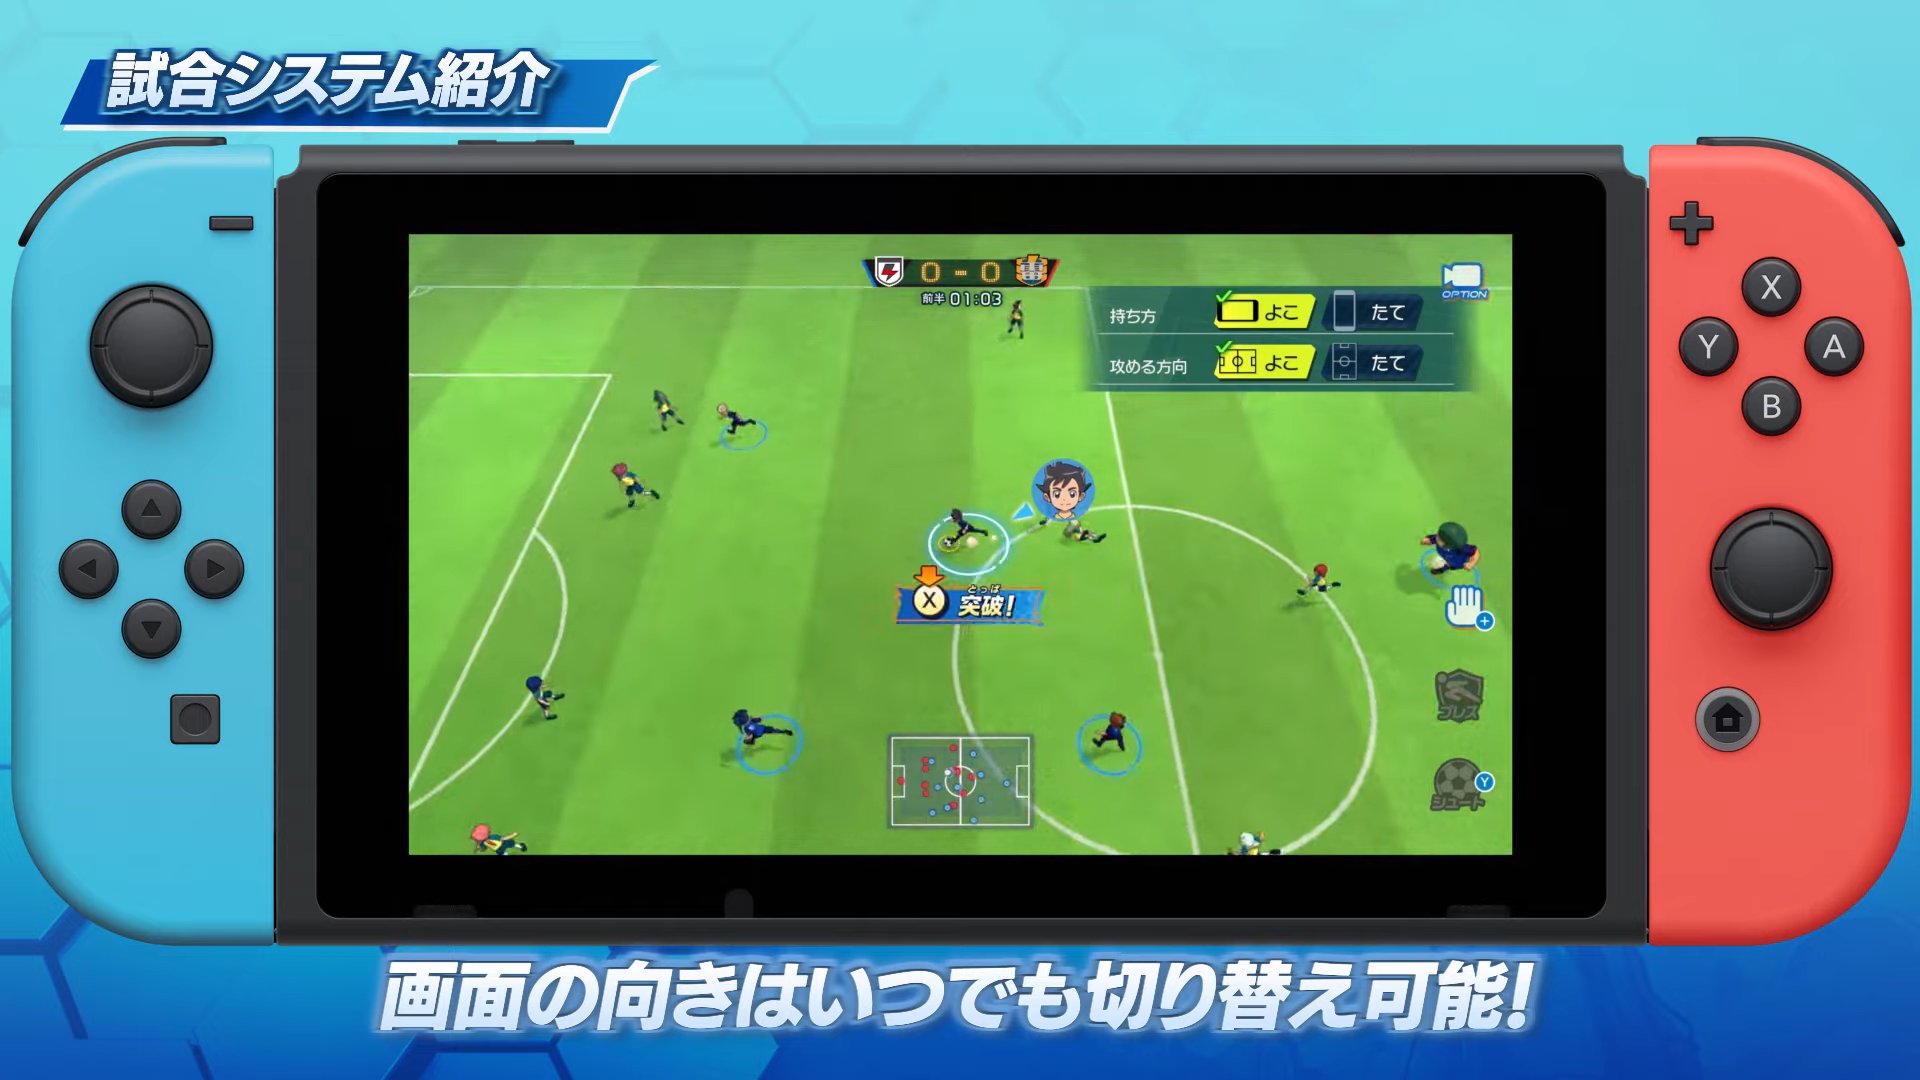 Inazuma Eleven Victory Road of Heroes